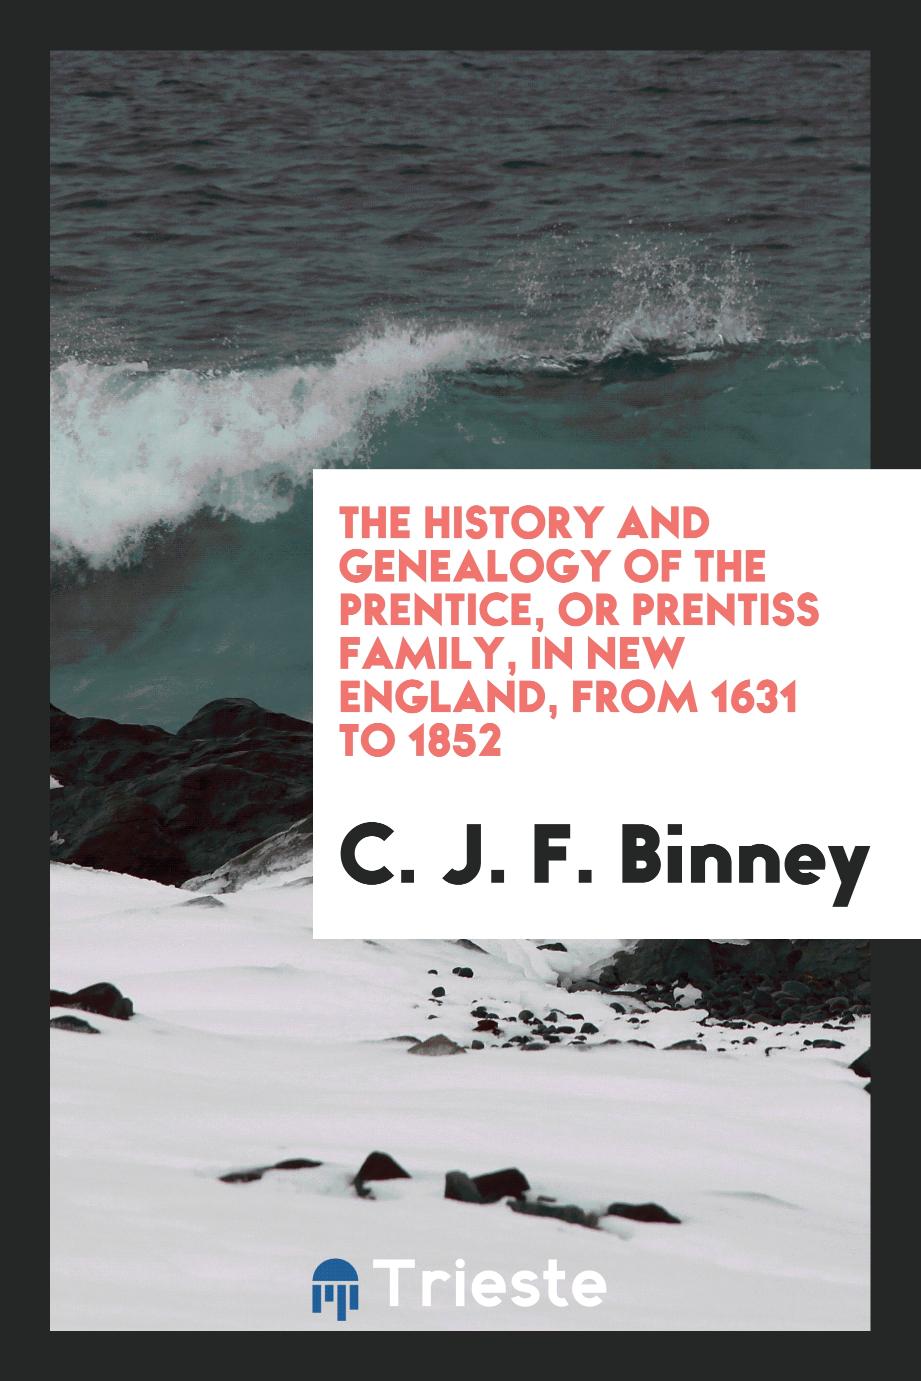 The History and Genealogy of the Prentice, or Prentiss Family, in New England, from 1631 to 1852